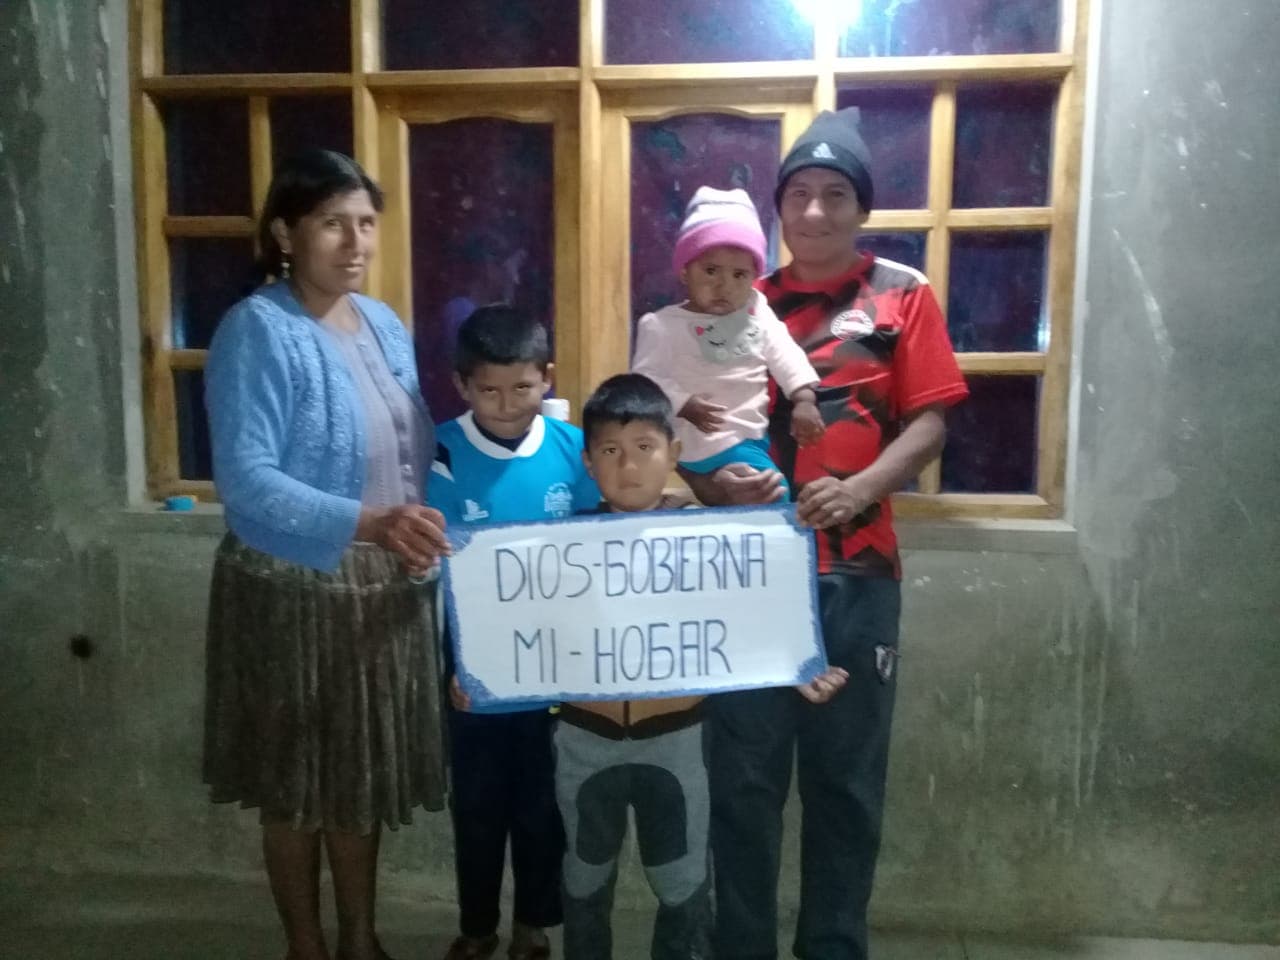 A family stands together holding a sign.